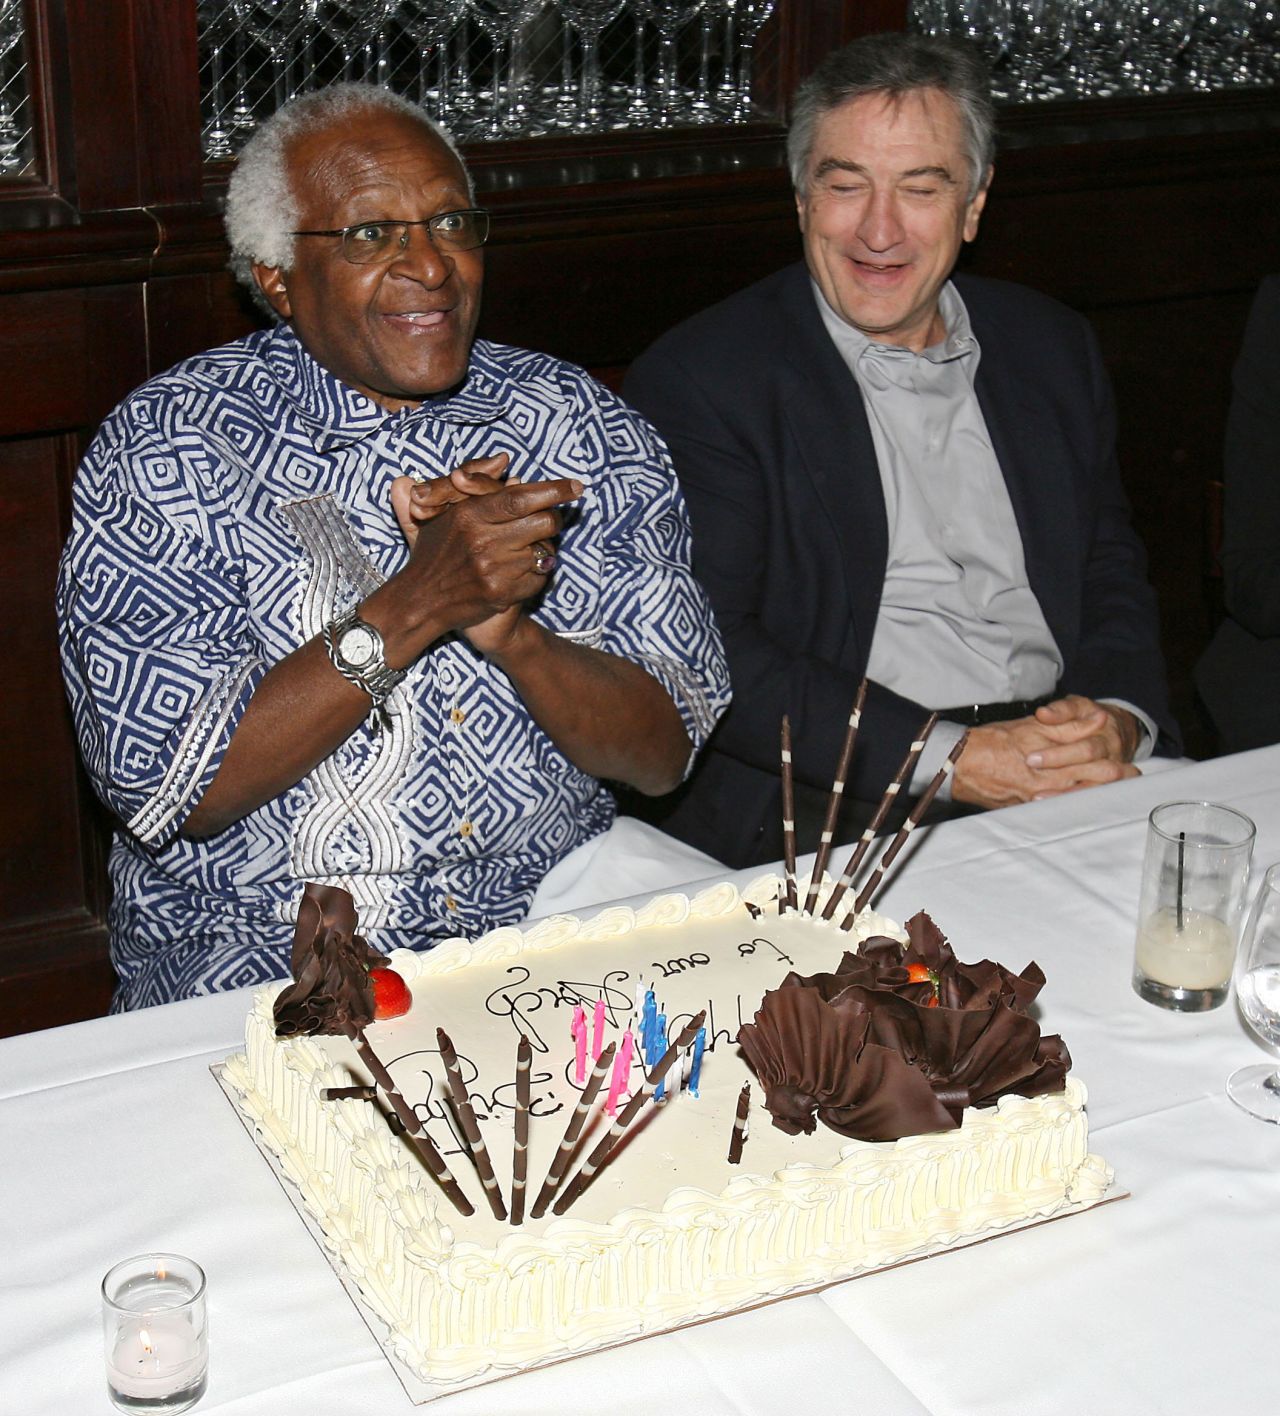 De Niro sits with Archbishop Desmond Tutu, who was celebrating his 75th birthday at the Tribeca Grill in New York in 2006.